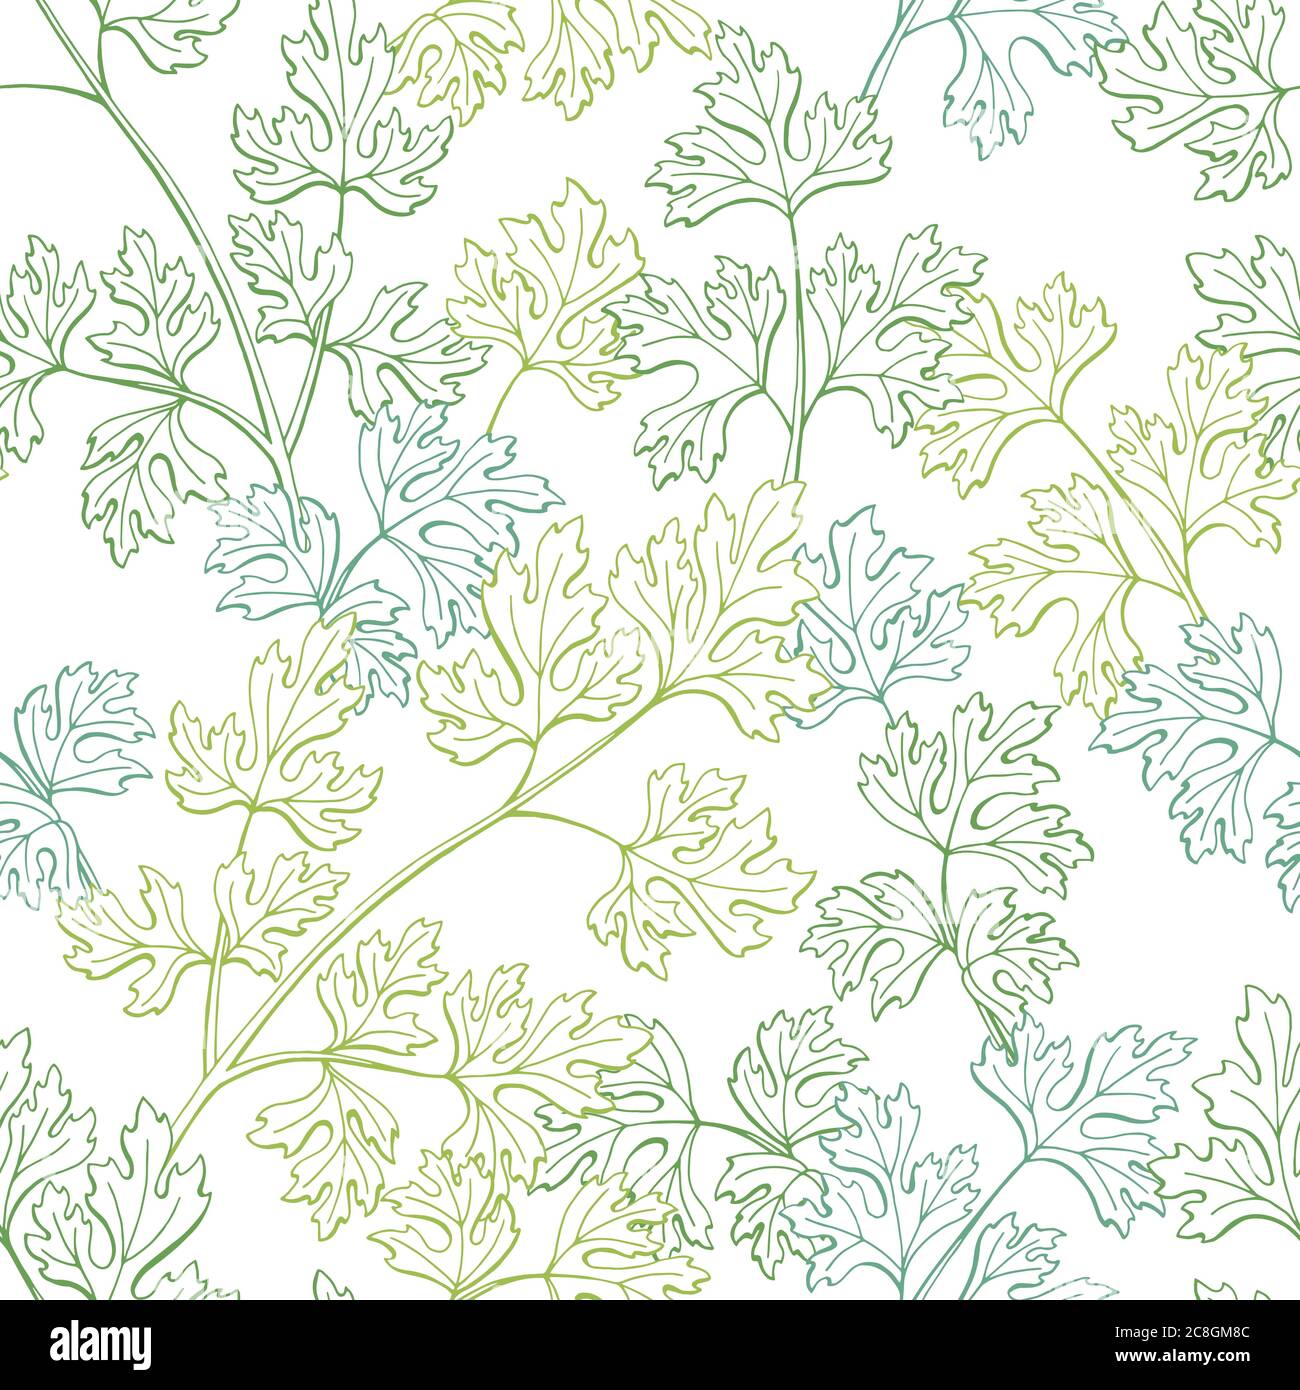 Parsley plant herb graphic green color sketch seamless pattern background illustration vector Stock Vector